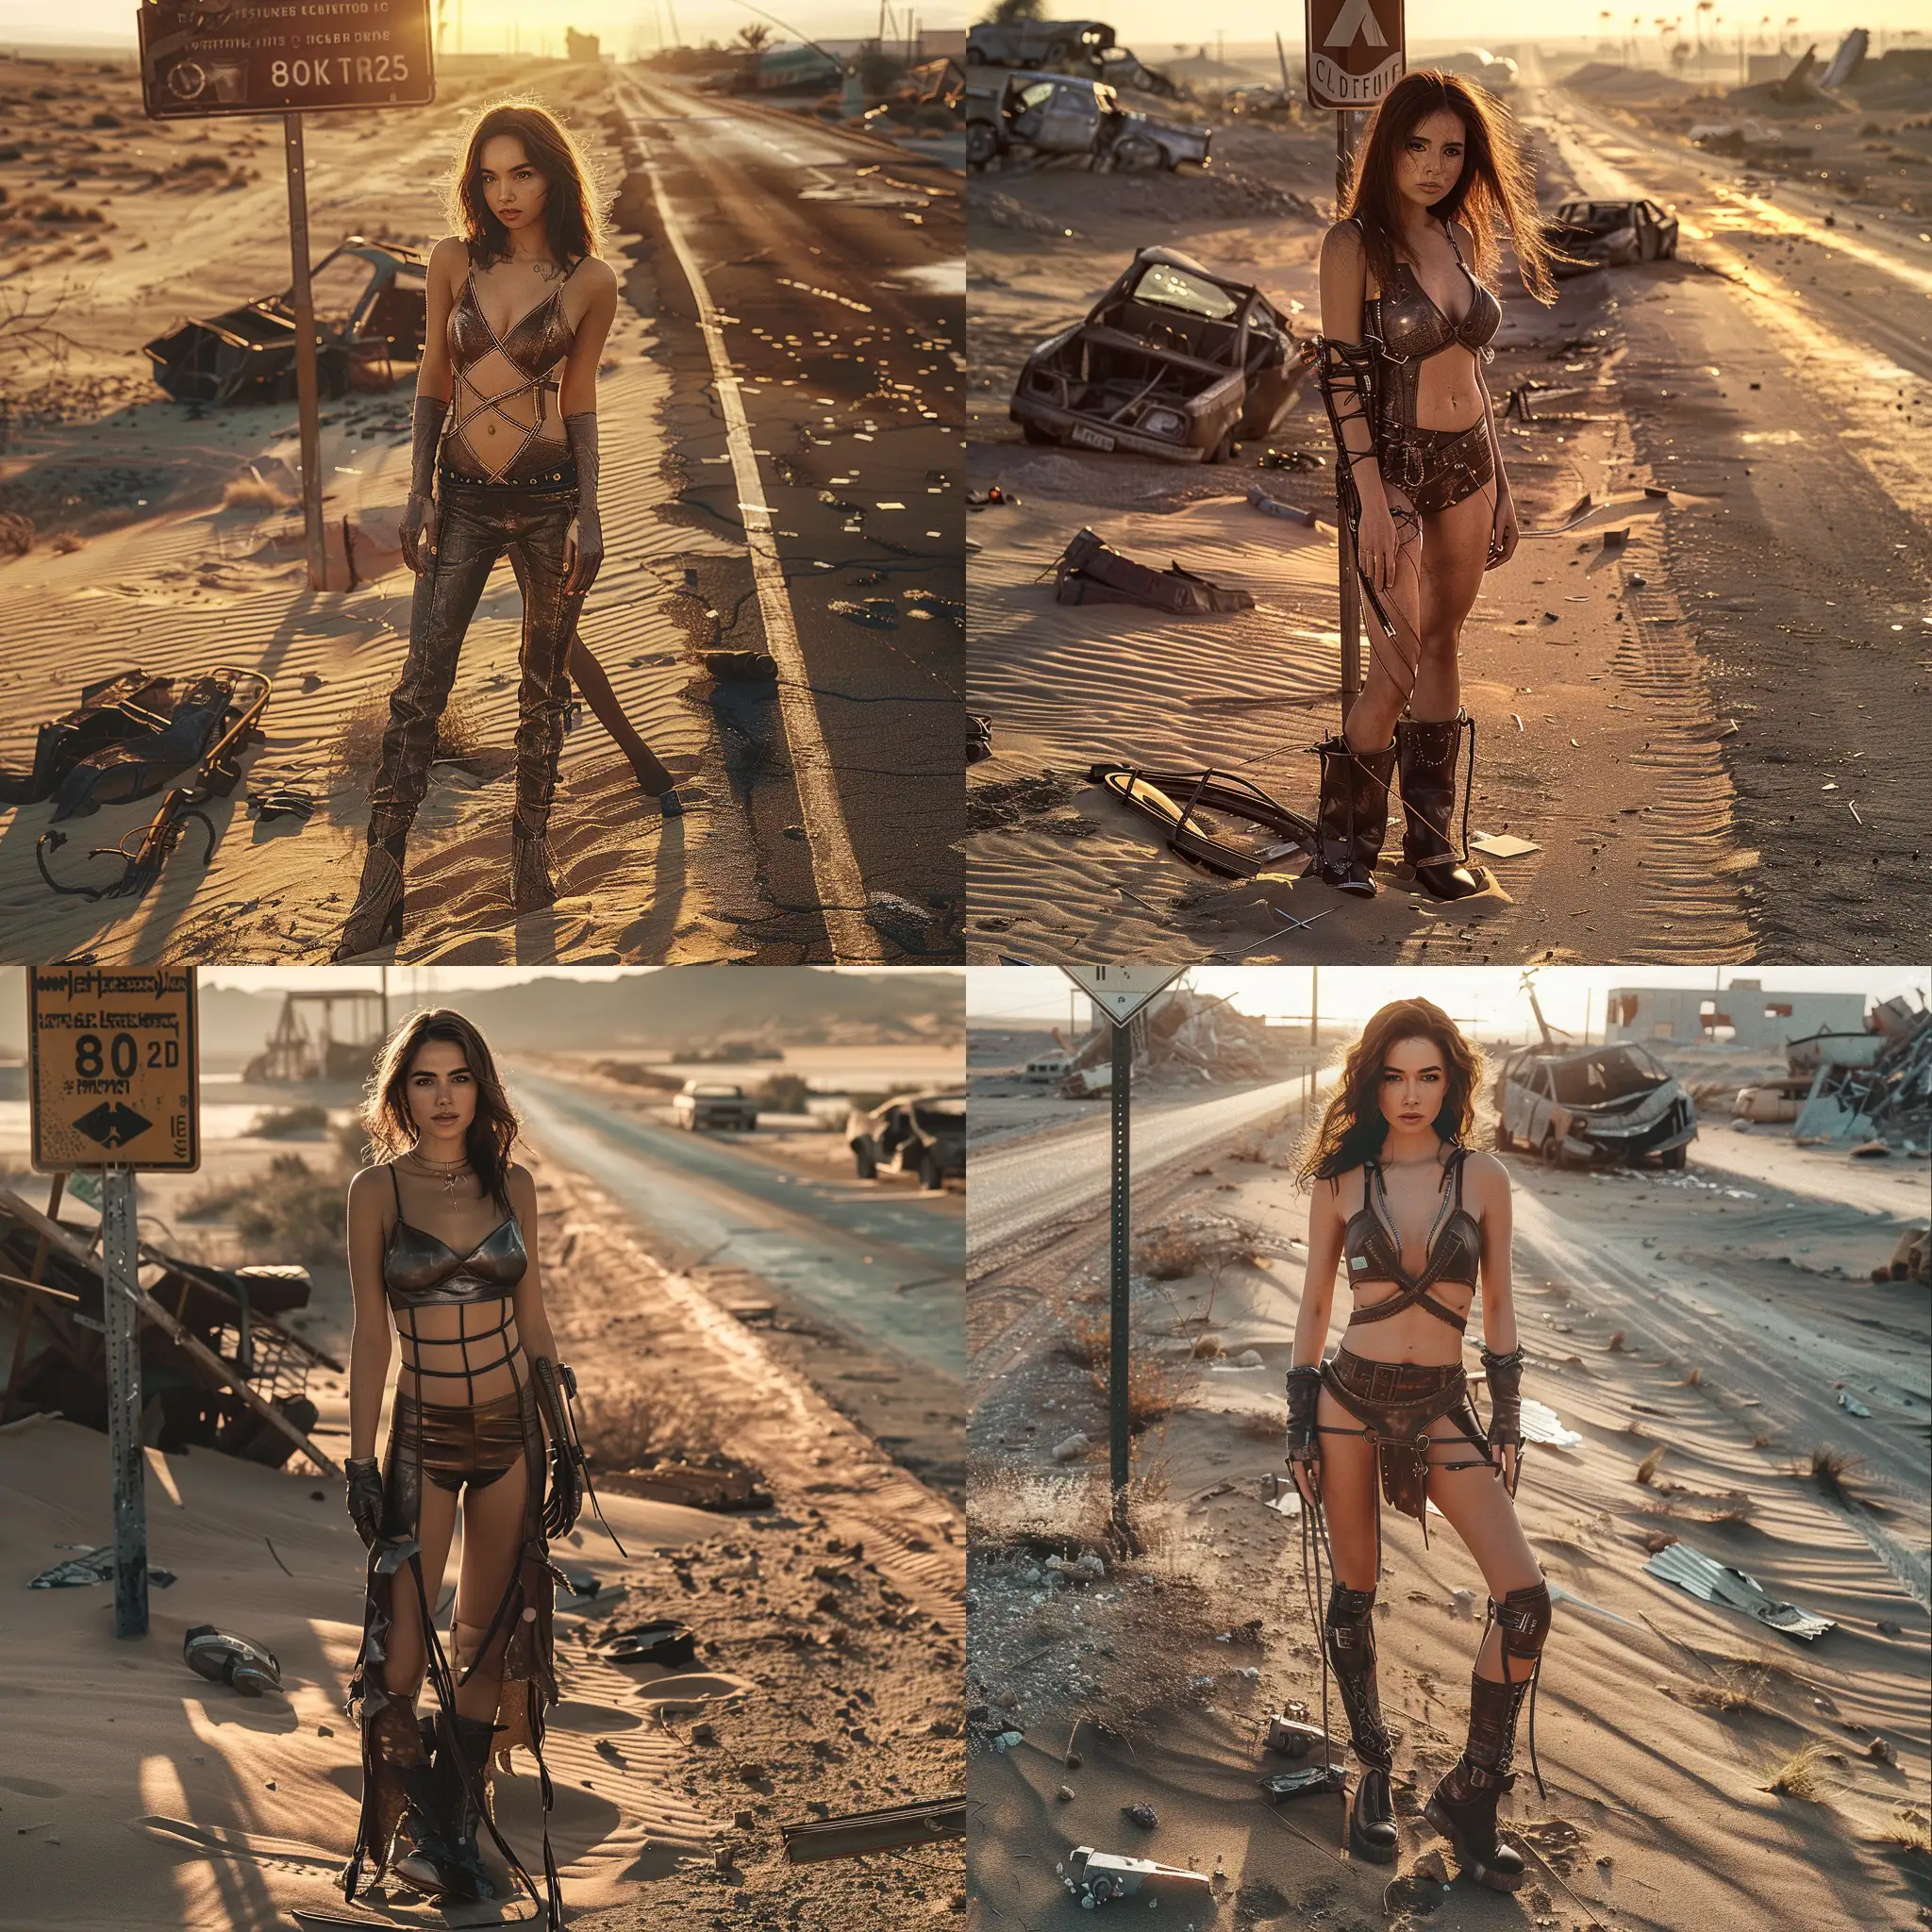 Full body view, a 25-year-old woman with brown hair, post-apocalyptic,  she is wearing a leather outfit with thin straps, the woman is standing next to a main road in the sand in front of a road sign, the background is a barren wasteland,, post-apocalyptic view, long clothes, shoes, ruins, ruins of buildings, broken cars, golden hour sunshine, space view, cinematic photo with dramatic lighting, hyper-realistic textures, atmospheric, dark, highly detailed, futuristic post-apocalyptic desert, cinematic, HDR, 8k, cinematic shot, professional color correction, volumetric lighting, sharp focus, film grain, high dynamic range, dramatic lighting, realistic textures